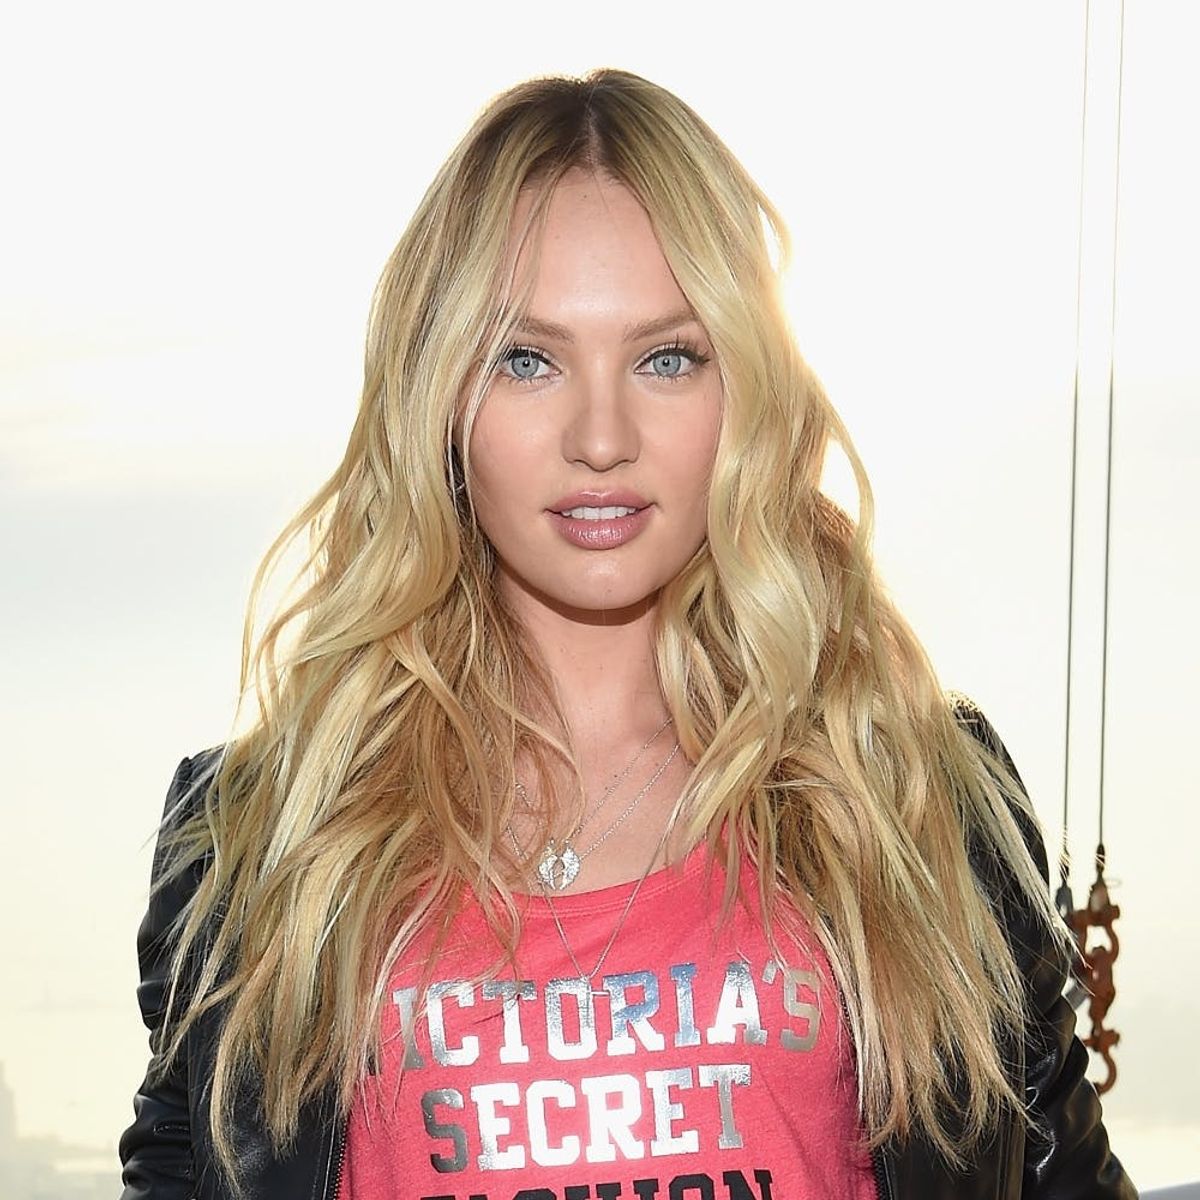 Candice Swanepoel Reveals Her Baby’s Name at Her Safari-Themed Baby Shower